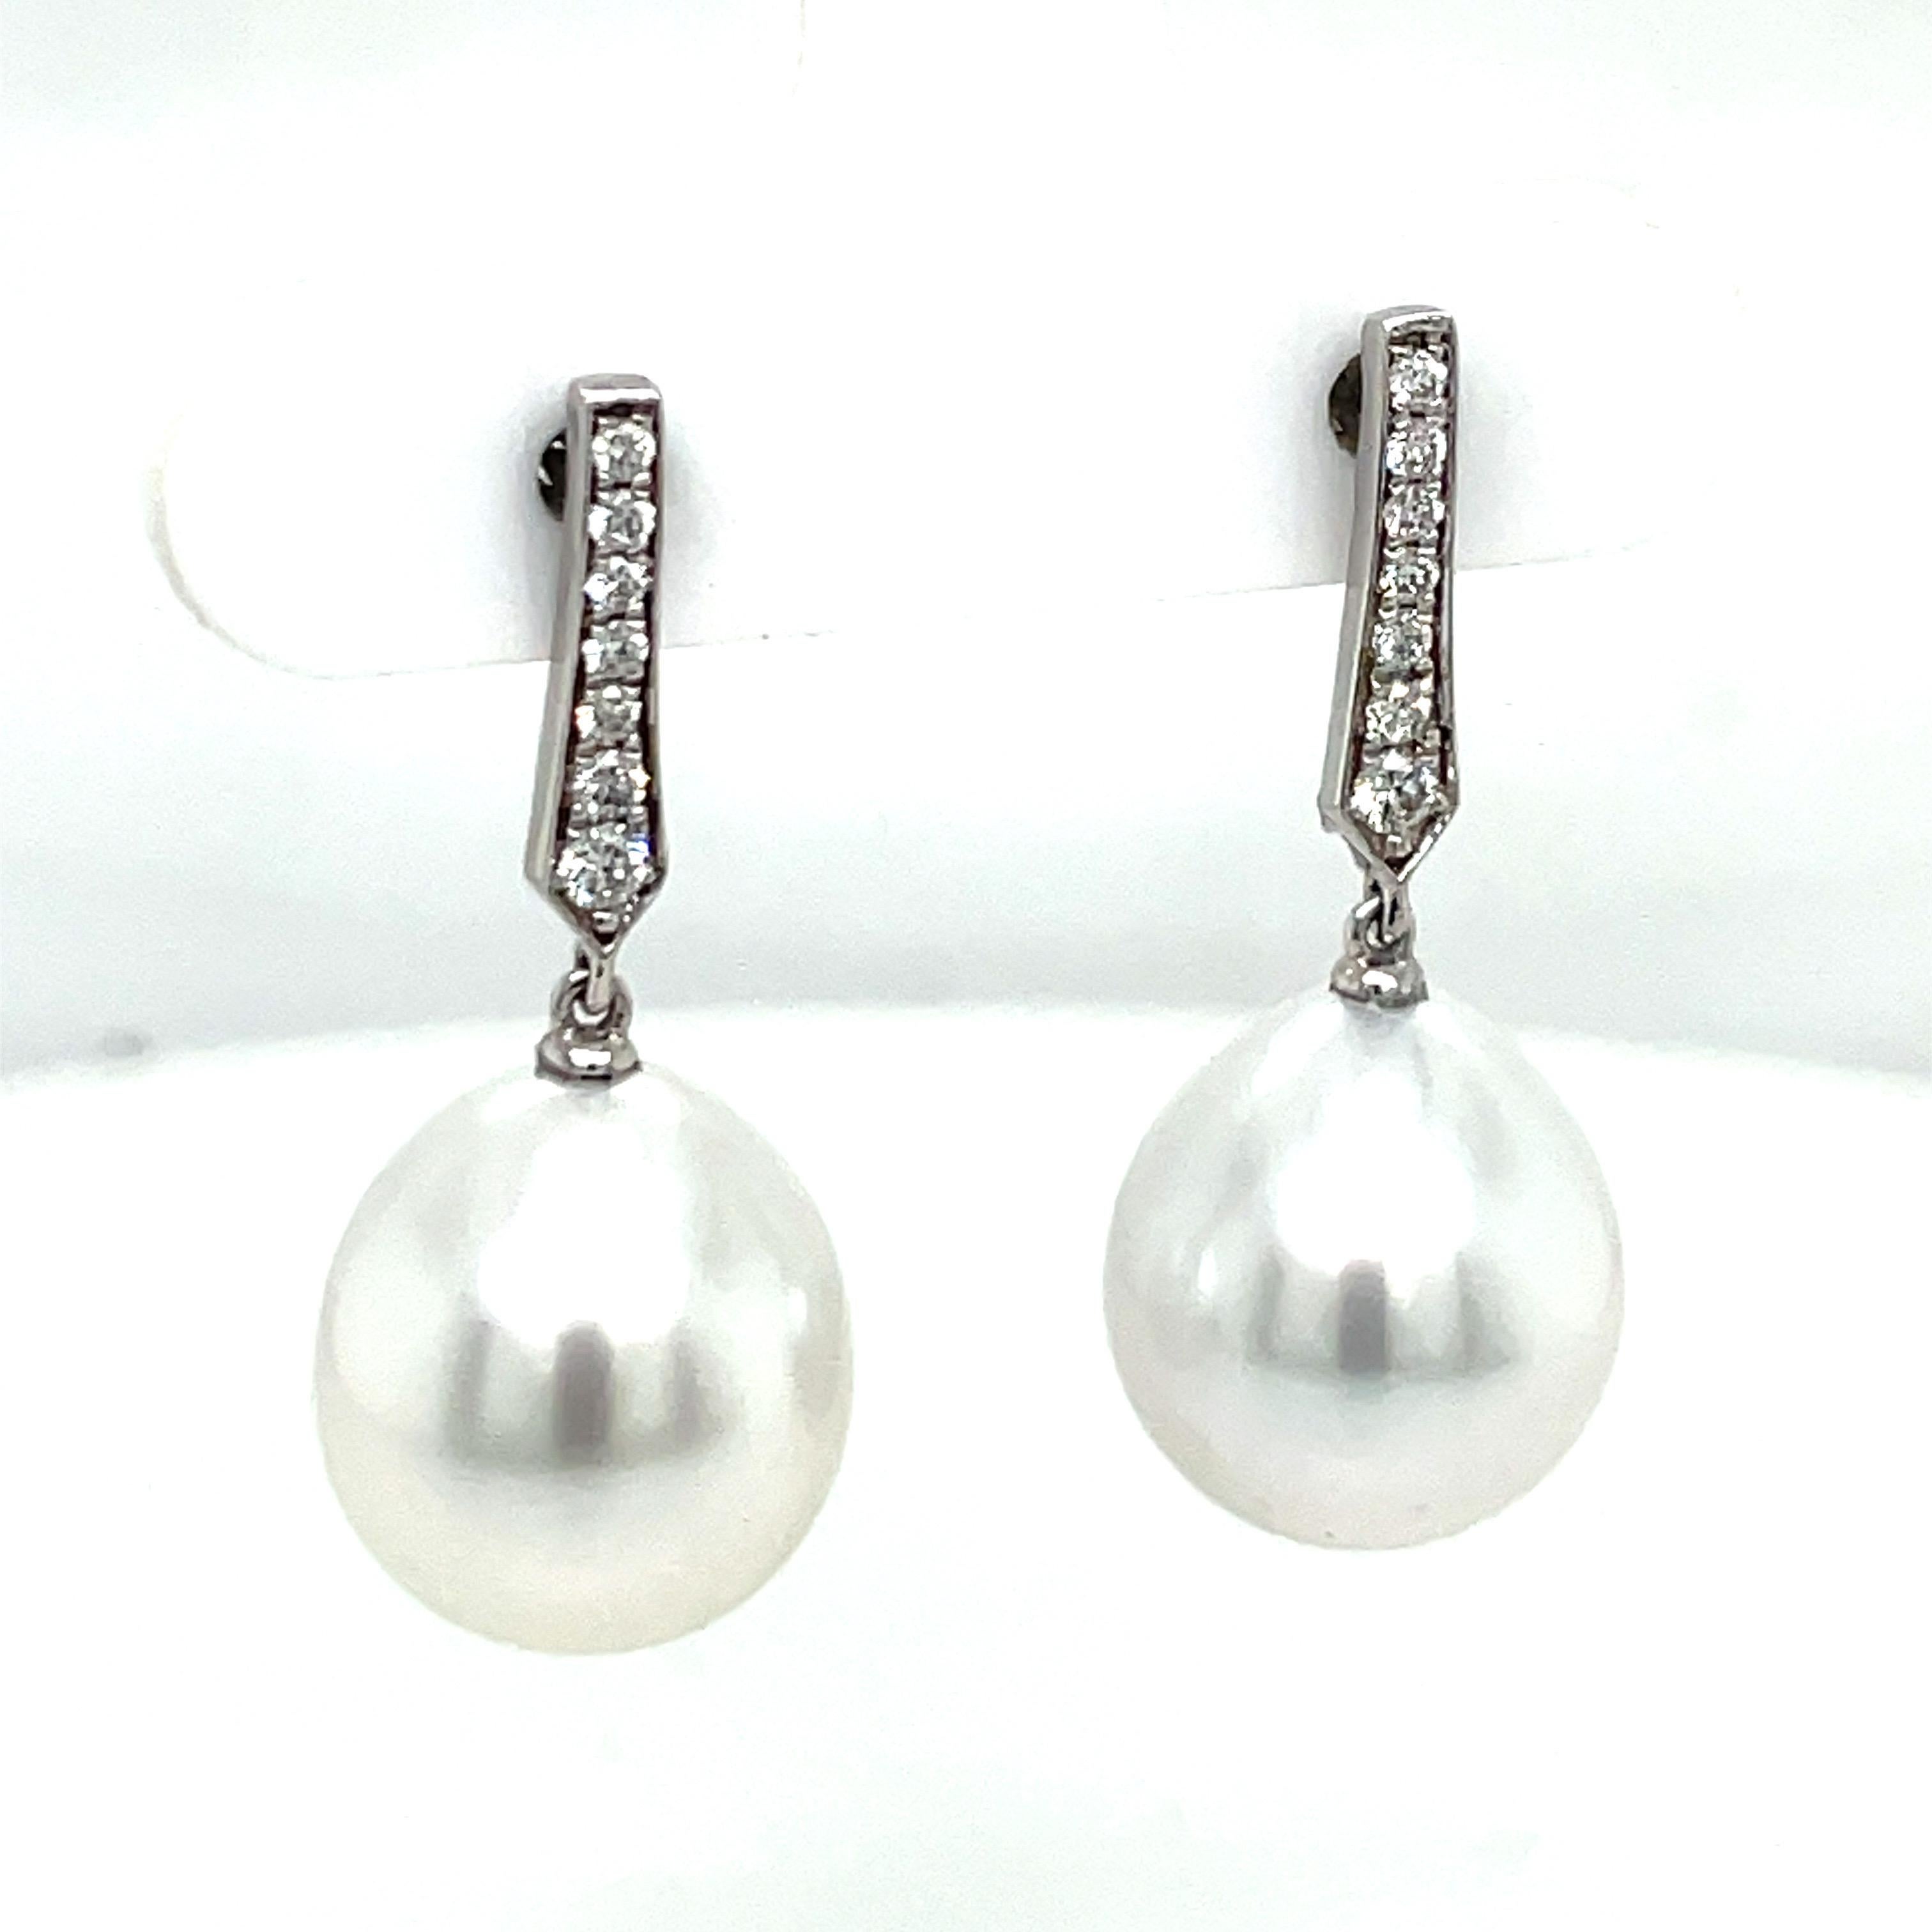 18 Karat White Gold drop earrings featuring 14 round brilliants weighing 0.16 Carats and two South Sea Pearls measuring 11-12 MM.

Can customize pearl to Golden, Pink or Tahitian. 
DM for more pricing. 